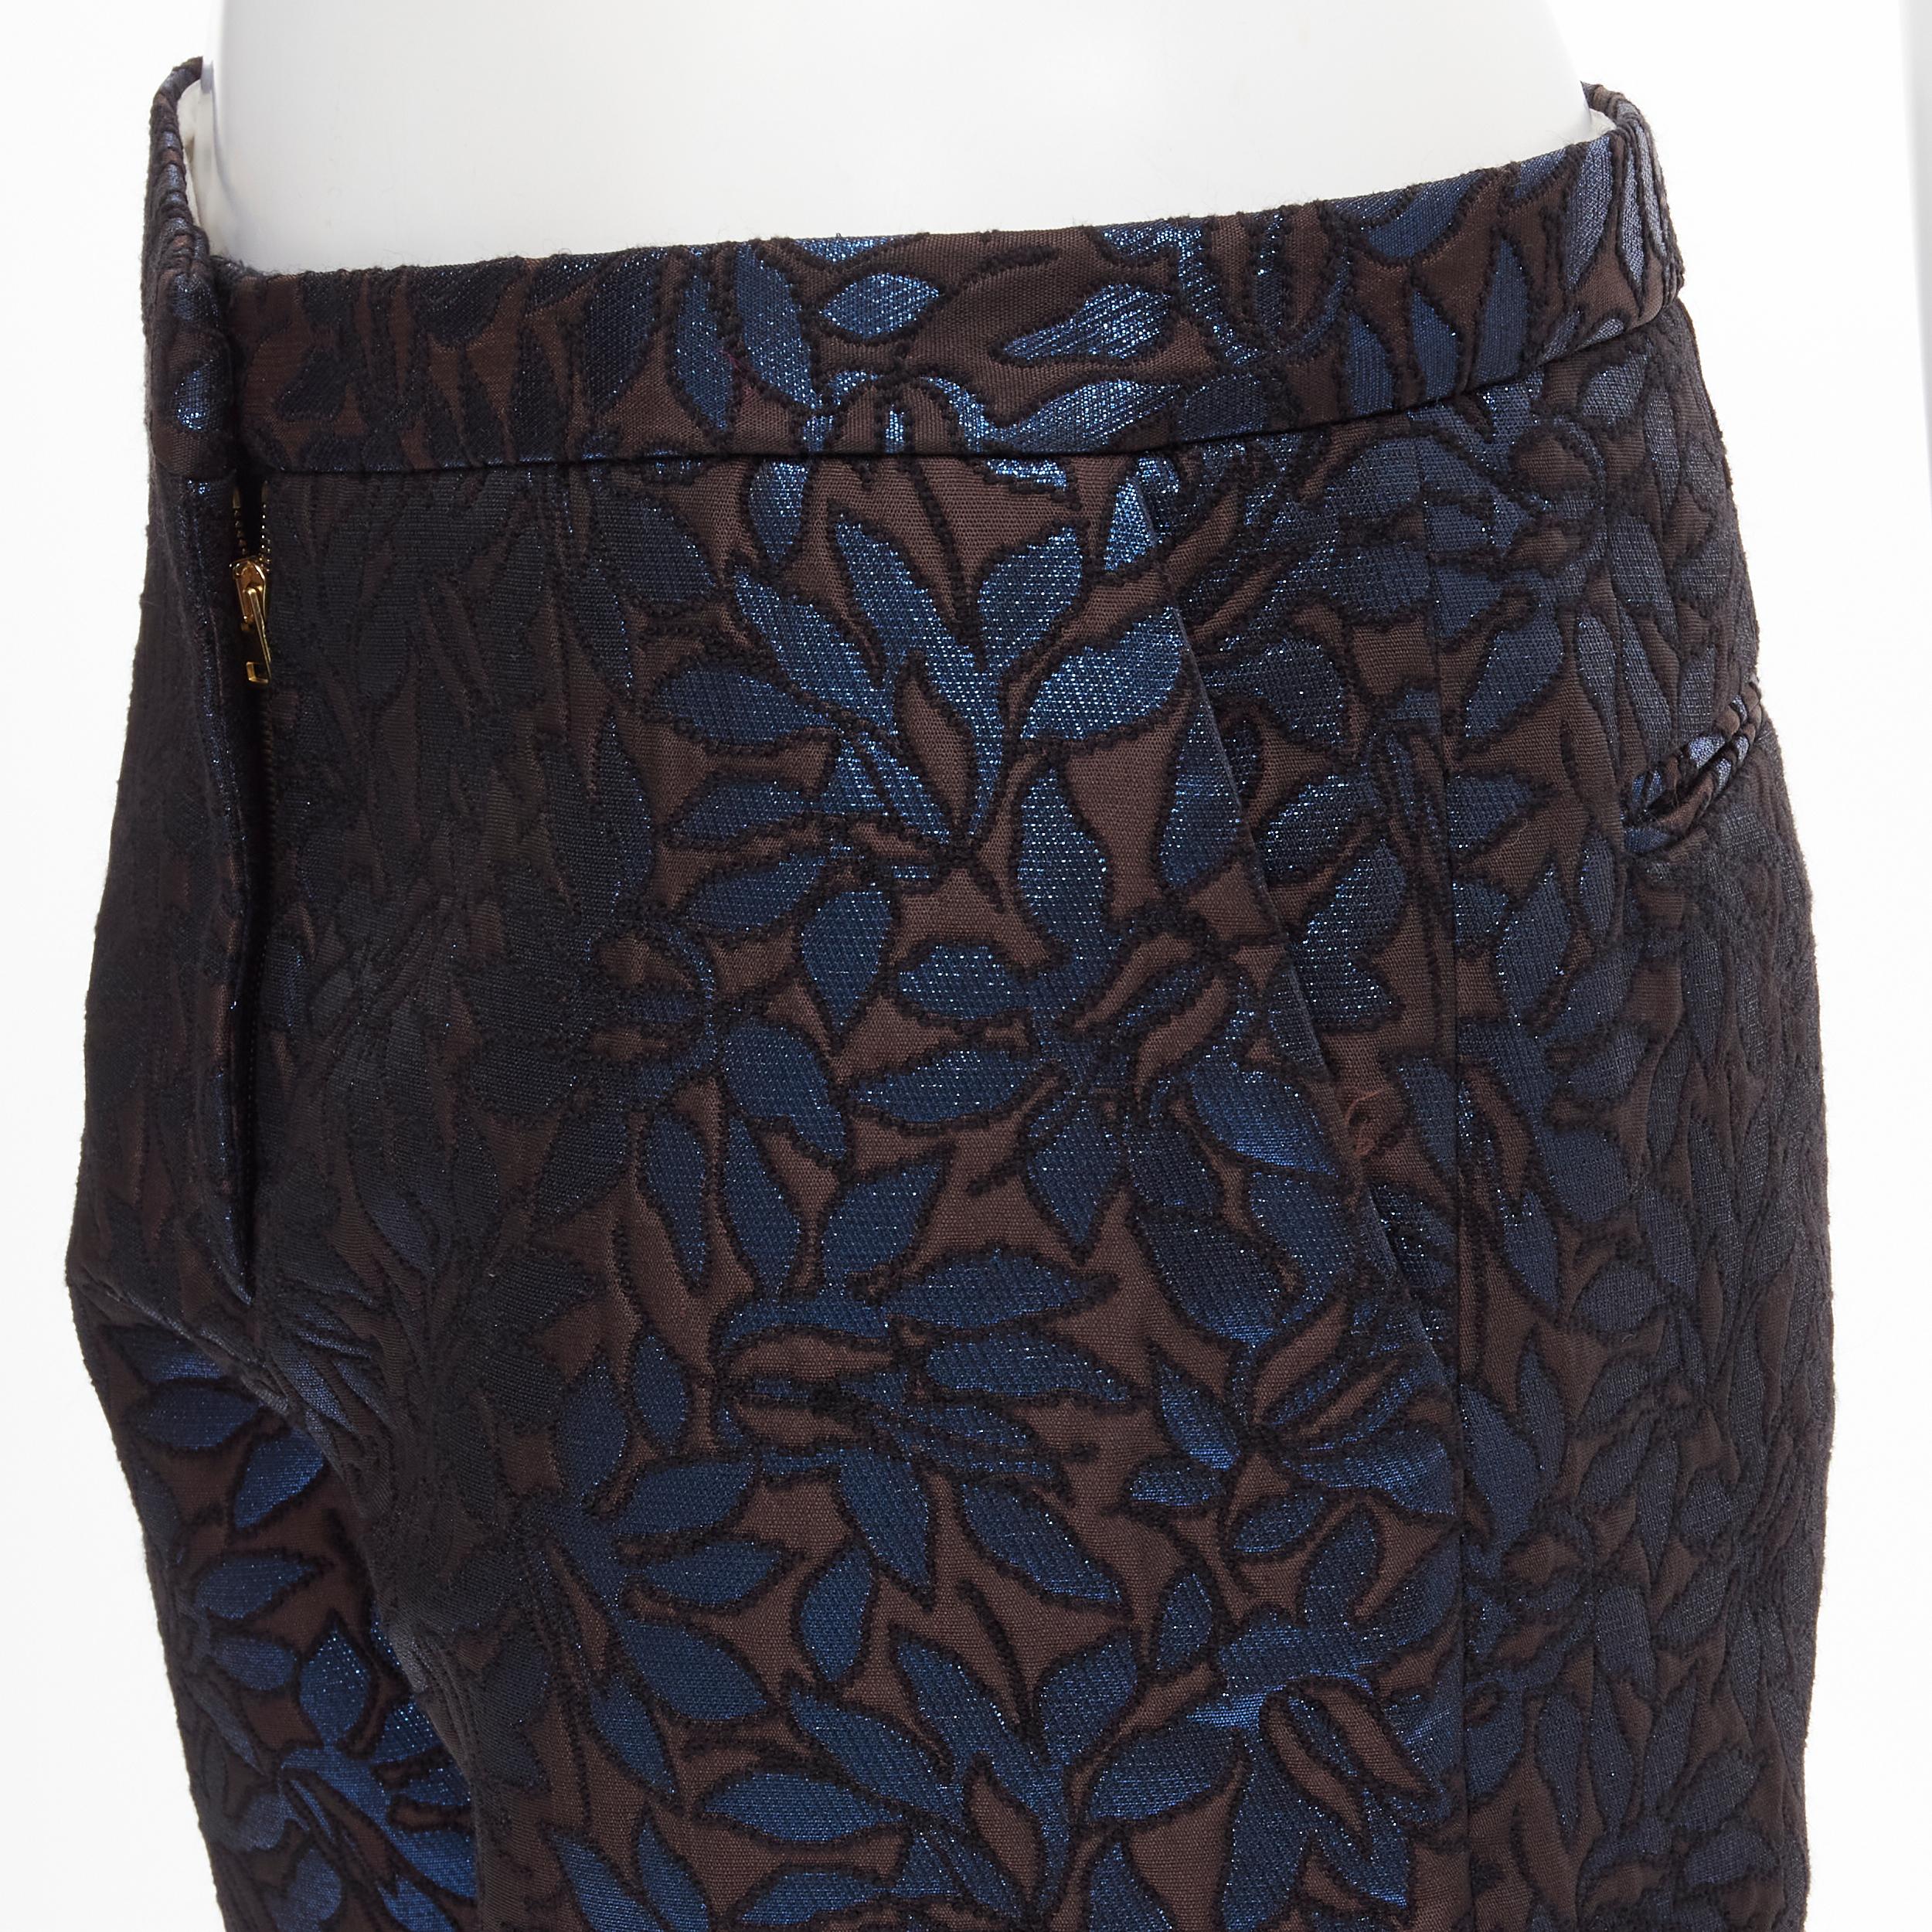 MARNI metallic blue brown floral jacquard wide leg trousers pants IT42 M 
Reference: CELG/A00222 
Brand: Marni 
Material: Polyester 
Color: Blue 
Pattern: Floral 
Closure: Zip 
Extra Detail: Hook bar zip fly. 4-pocket design. Straight leg. 
Made in: